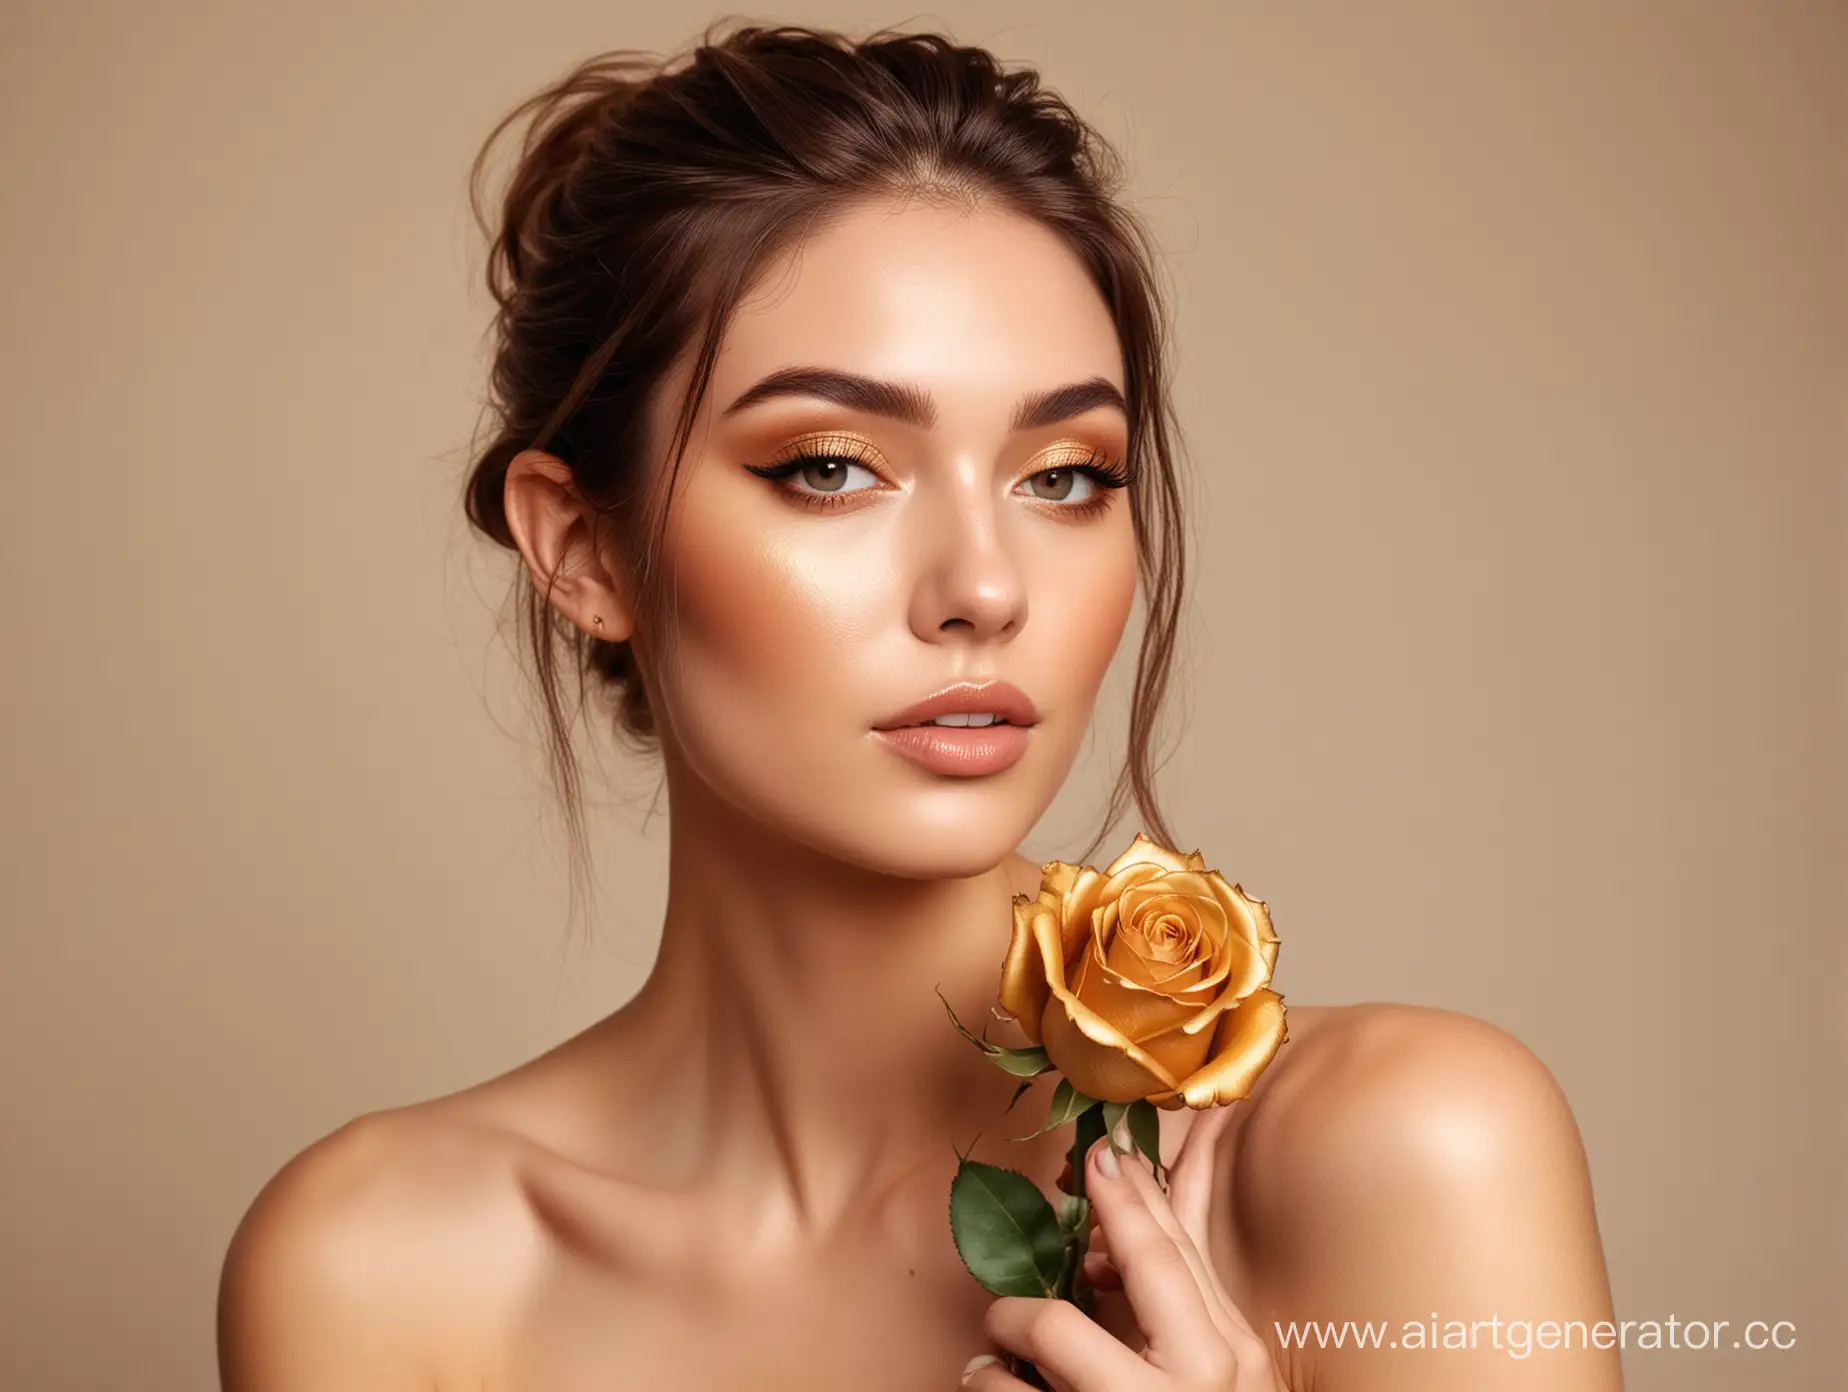 Elegant-Woman-with-Delicate-Makeup-Posing-Gracefully-with-a-Golden-Rose